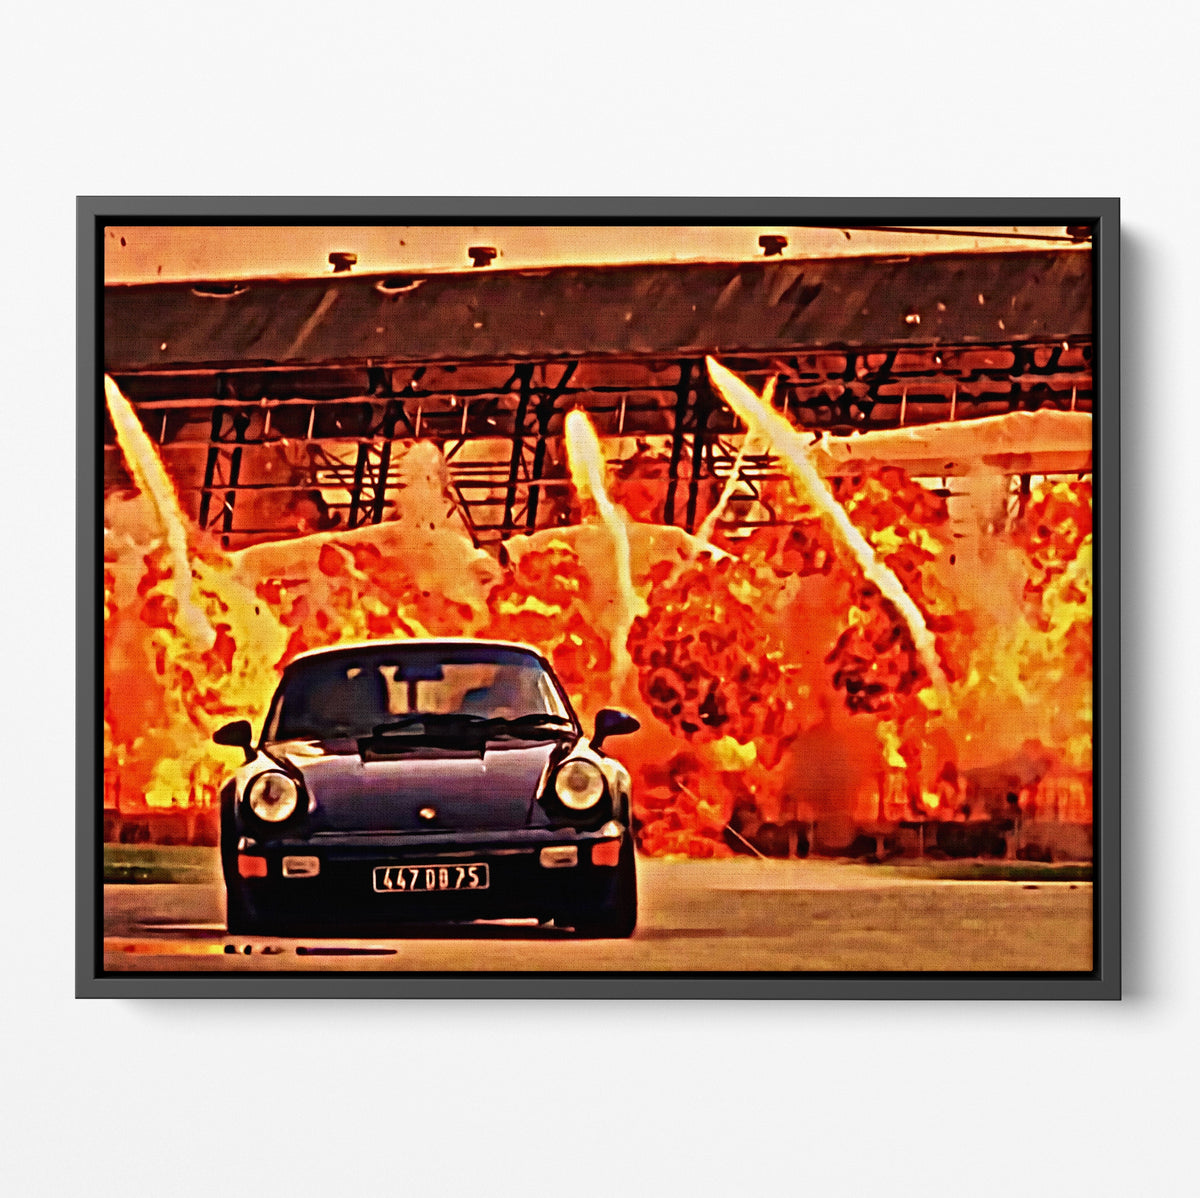 Bad Boys Fast Cars & Explosions Prints | Far Out Art 